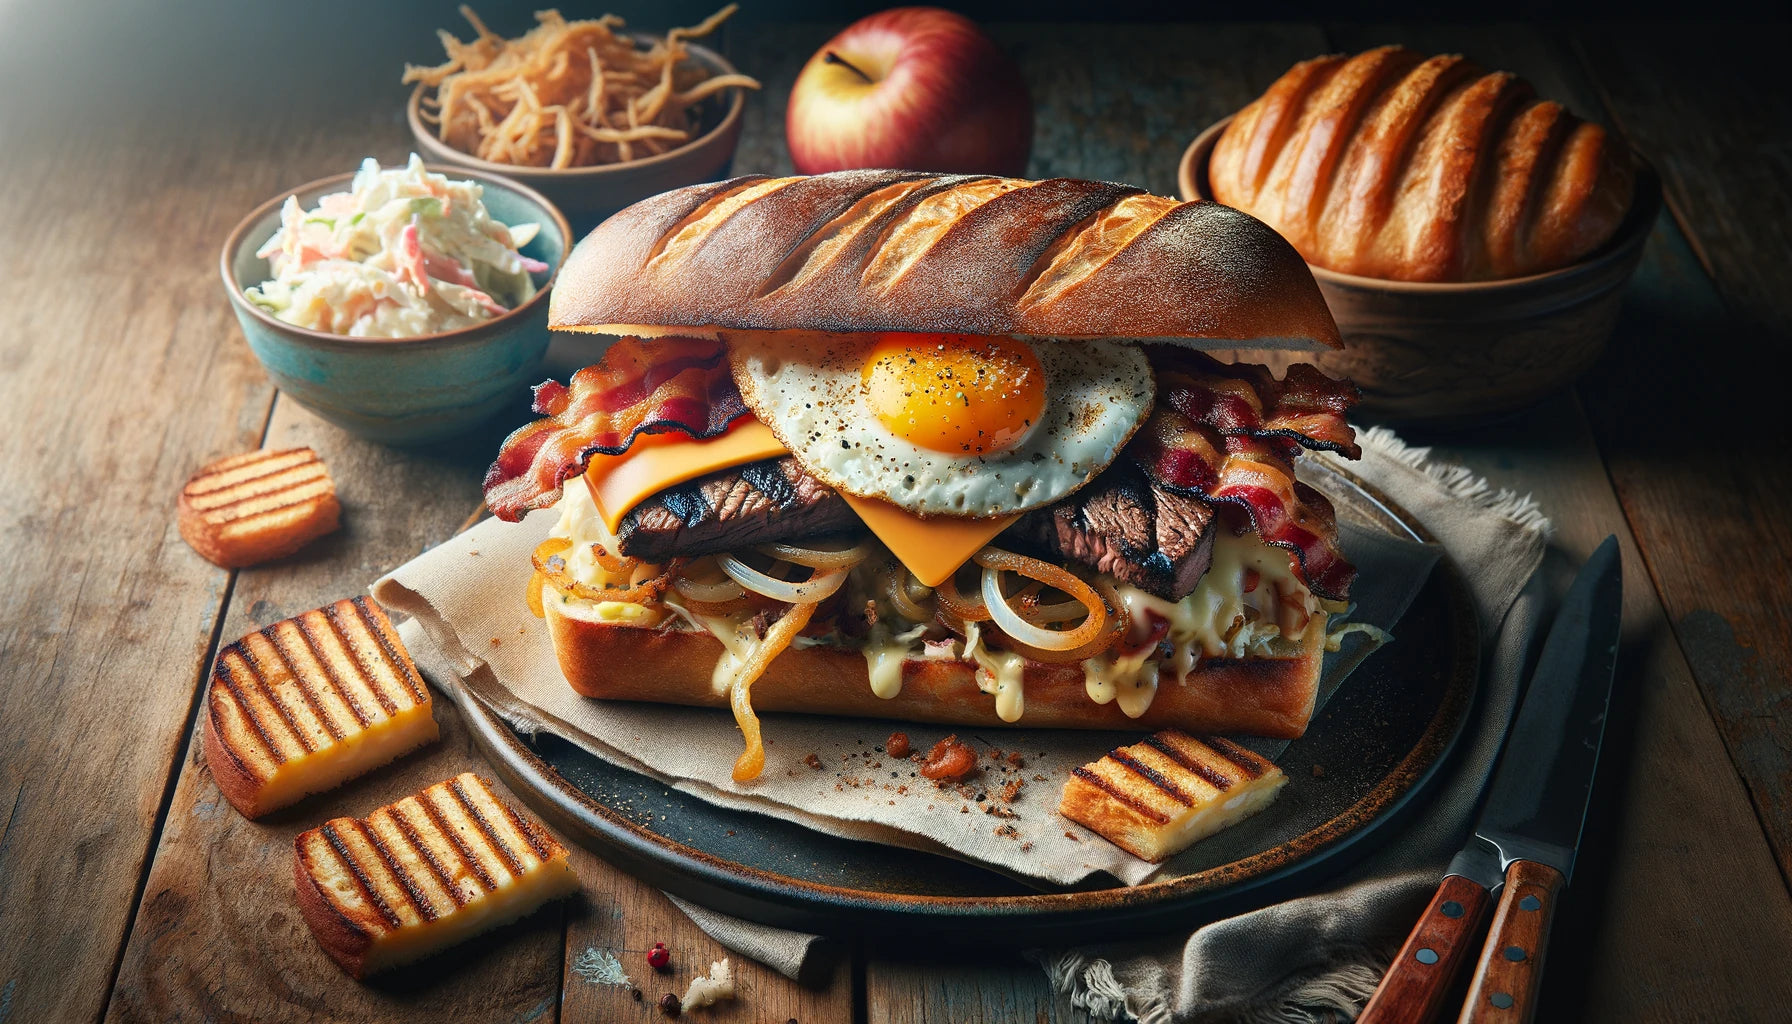 Grilled Steak Sandwich with egg and cheese, complete with a side of crispy coleslaw and apple turnover